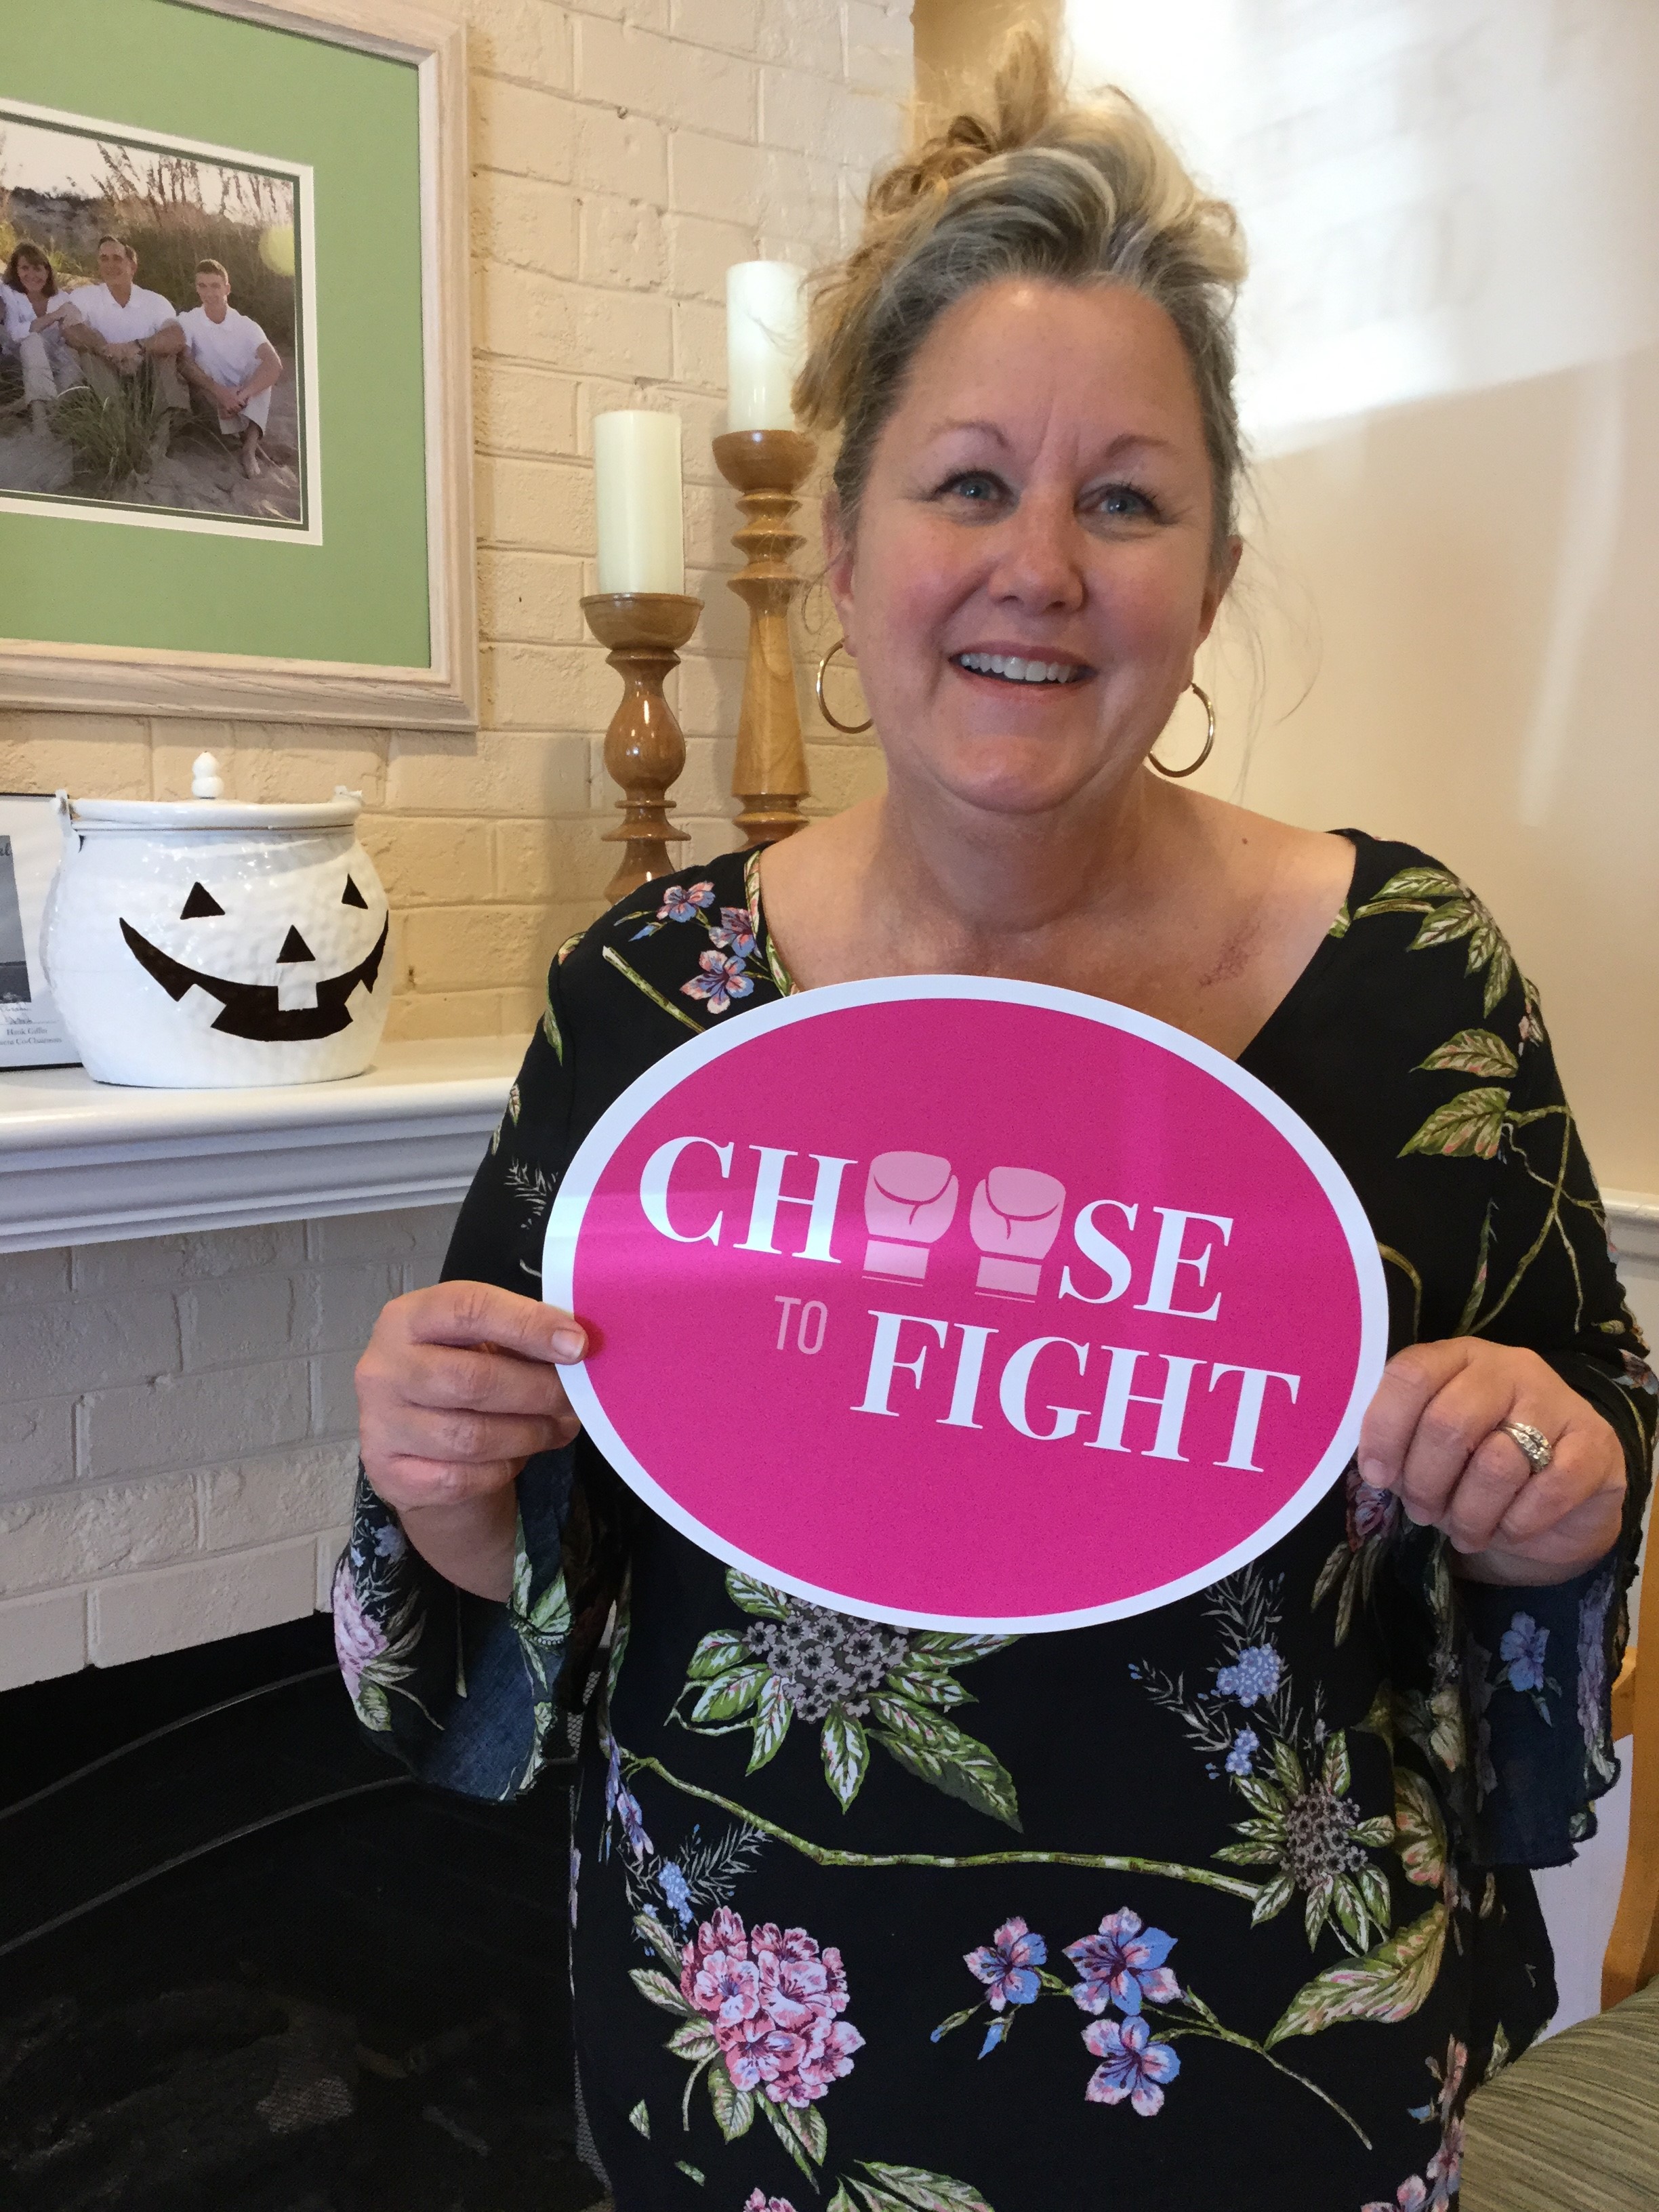 Our breast cancer survivor, Judy, has been cancer-free for four years